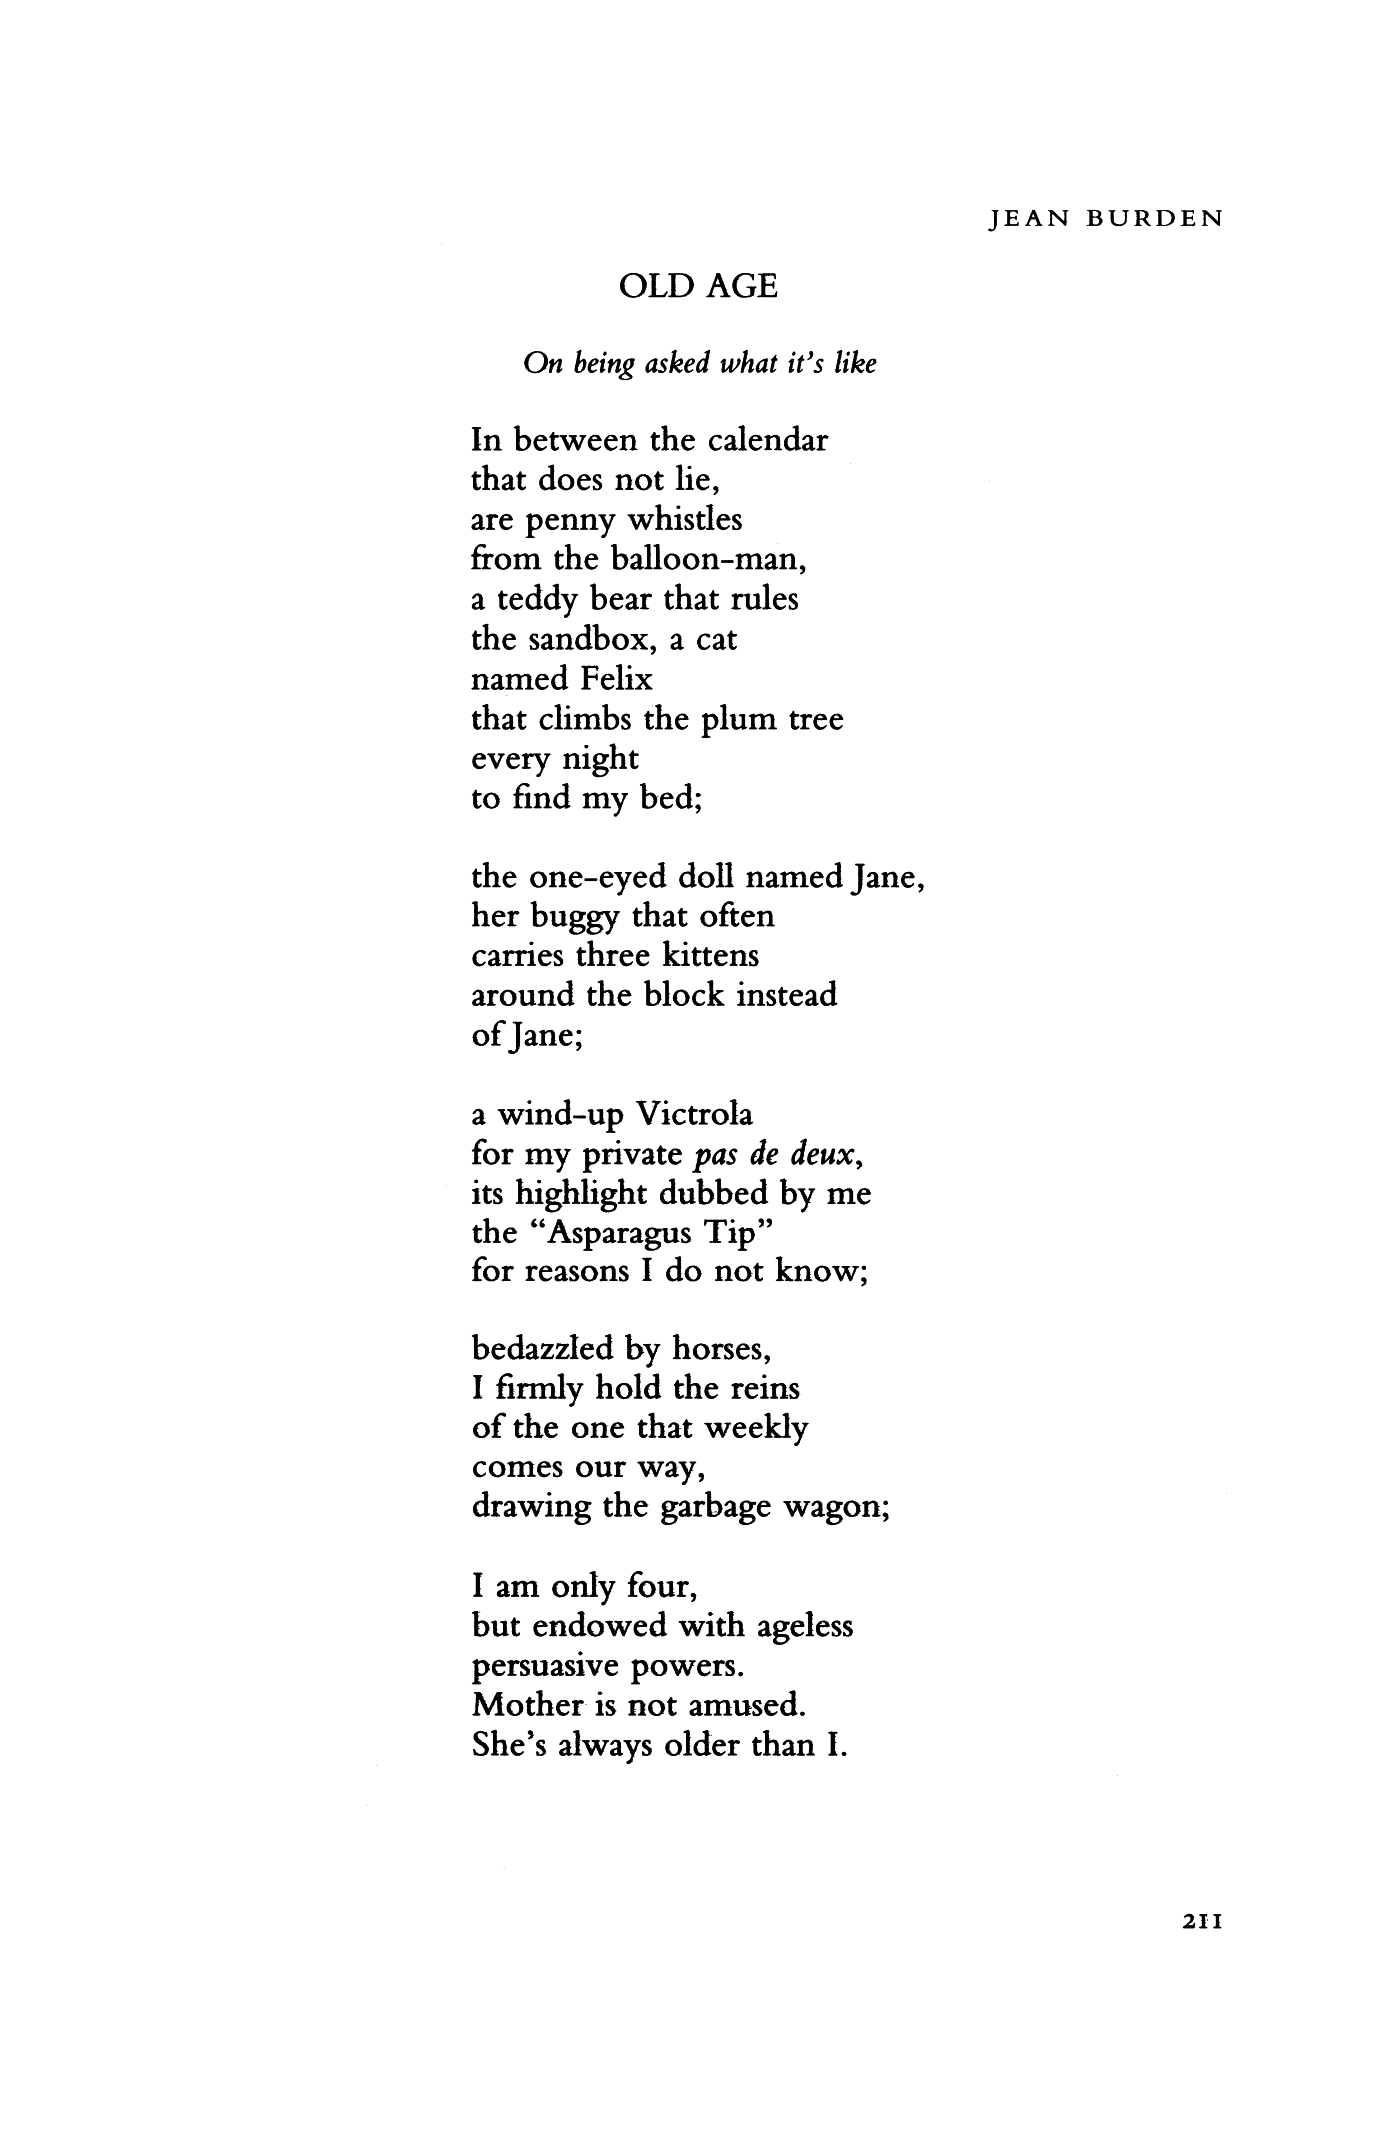 how to be old poem